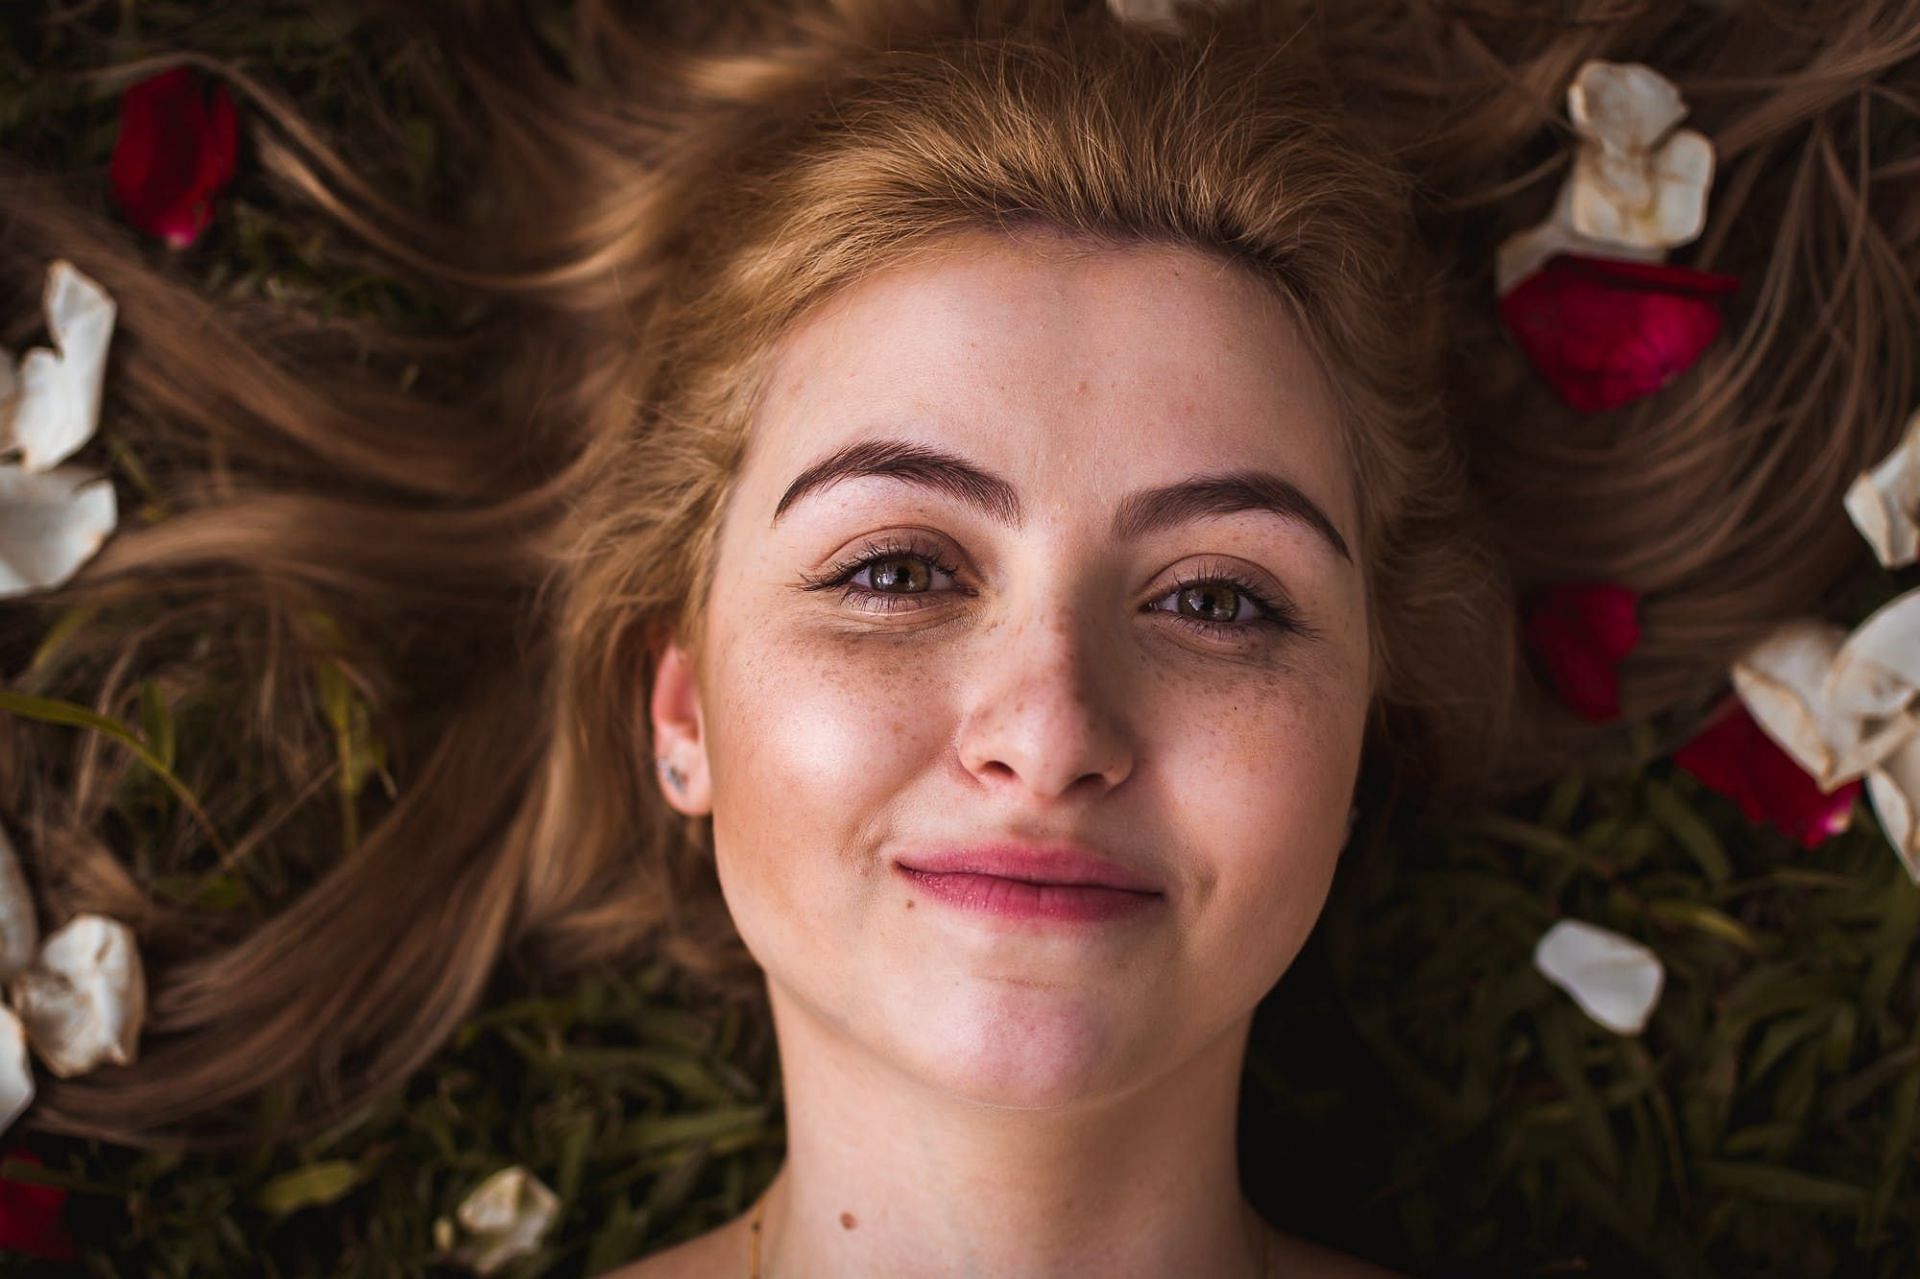 Importance of smooth skin (image sourced via Pexels / Photo by xavier)